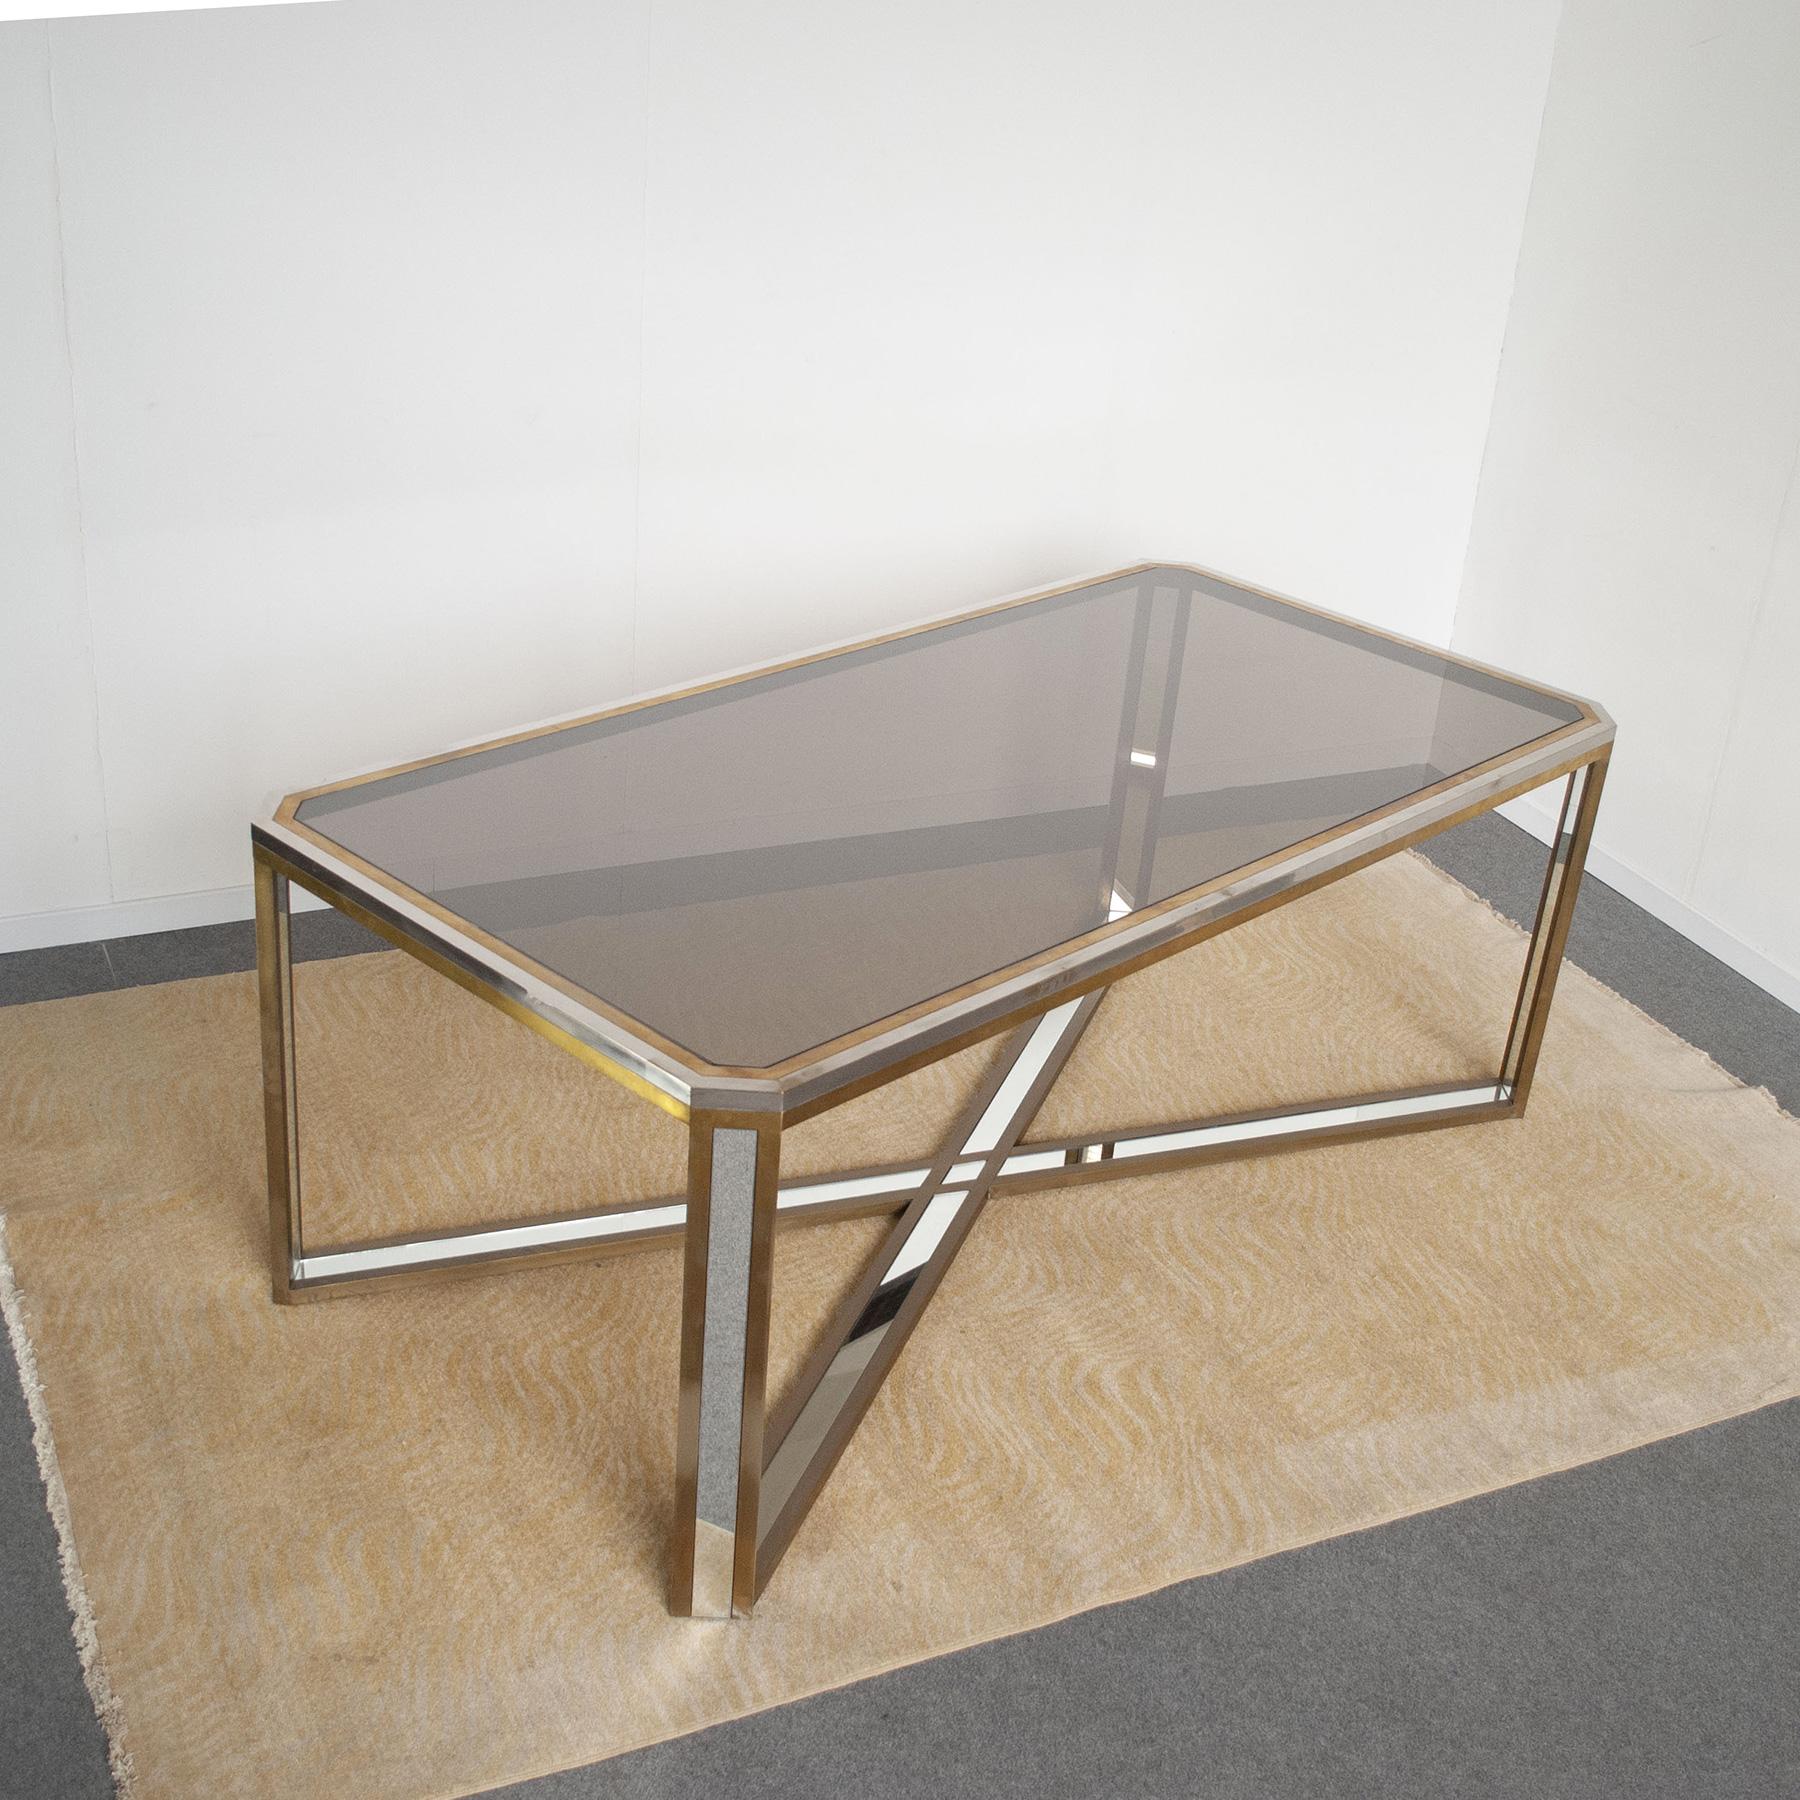 Romeo Rega 1970s Italian Midcentury Table in Stainless Steel, brass and Mirror For Sale 5